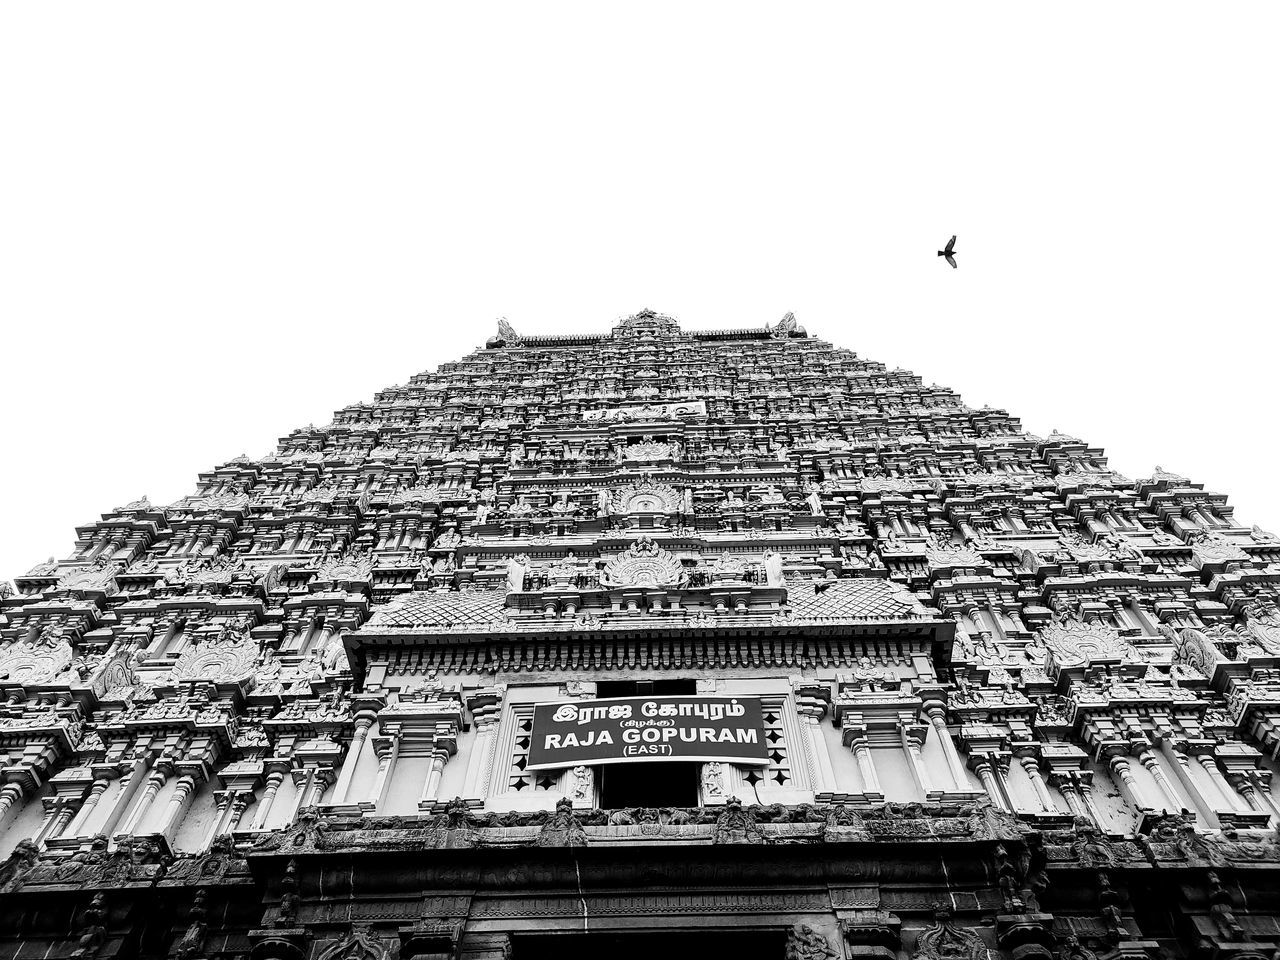 architecture, built structure, building exterior, black and white, sky, travel destinations, low angle view, history, the past, building, travel, clear sky, temple - building, landmark, religion, belief, tourism, monochrome photography, place of worship, monochrome, nature, no people, archaeological site, day, spirituality, outdoors, ancient, city, monument, temple